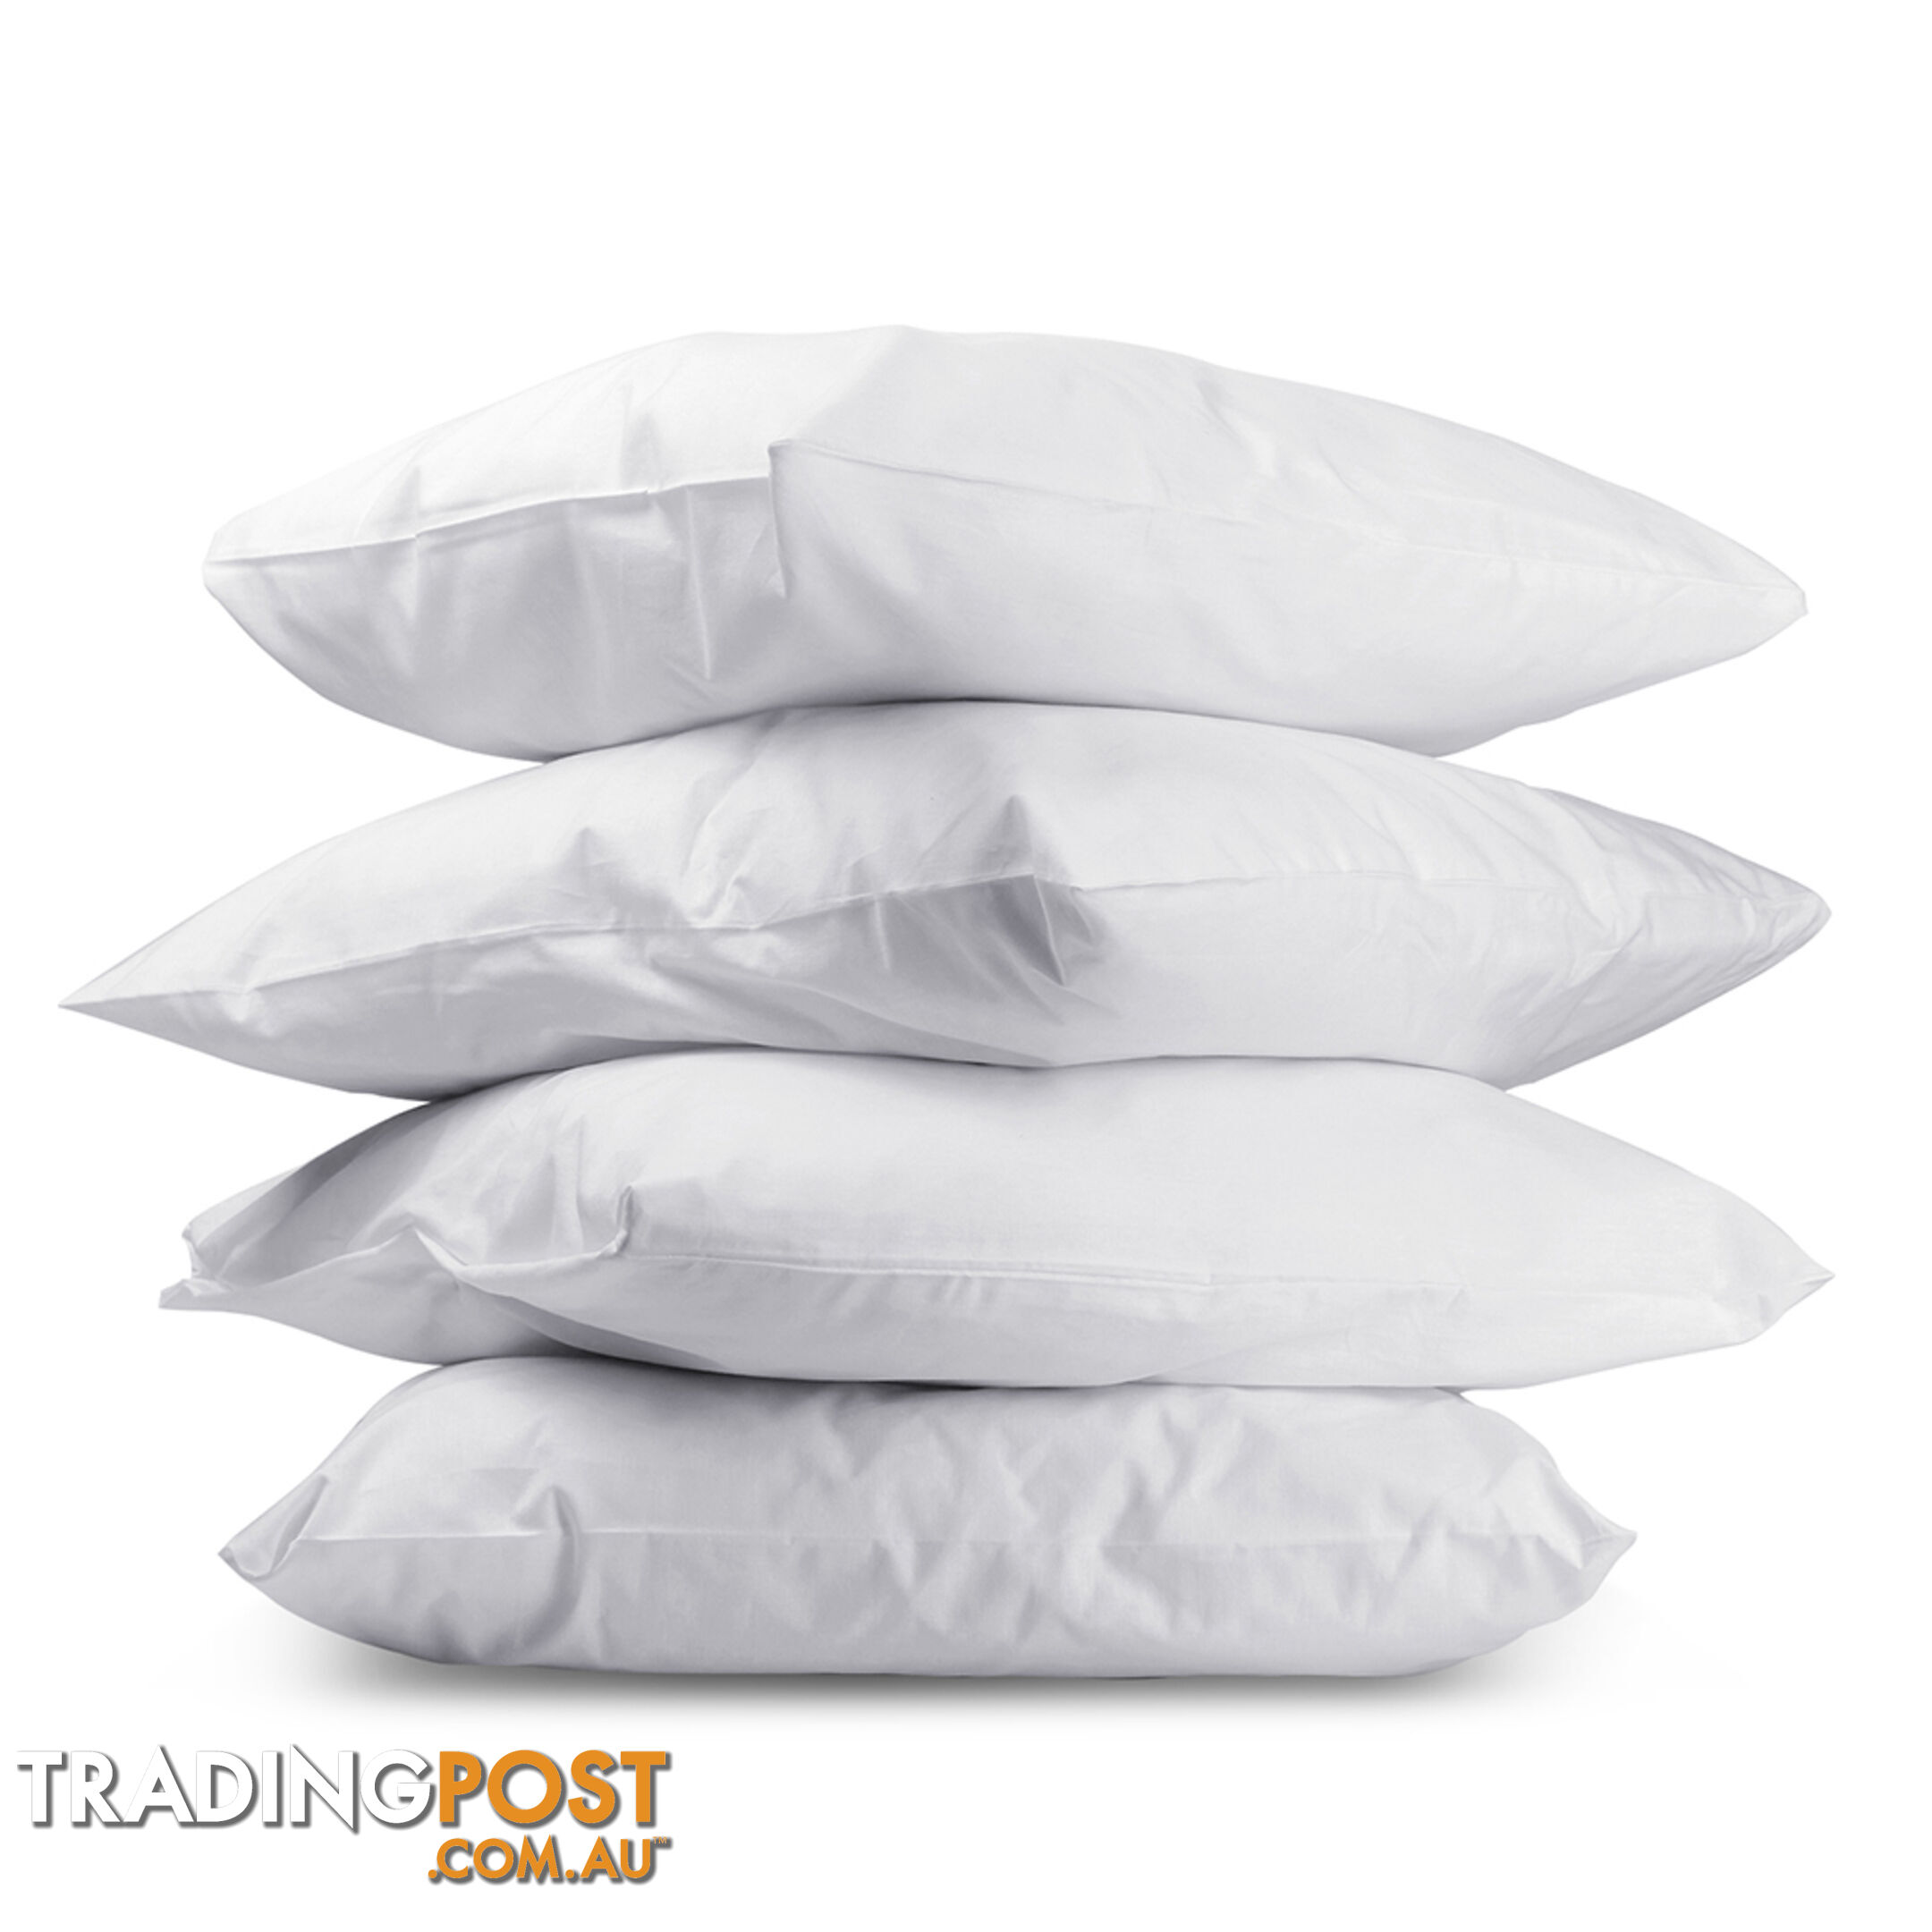 New 4 x Firm Bed Pillows Set Cotton Cover Family Hotel Air BNB 73 x 48cm